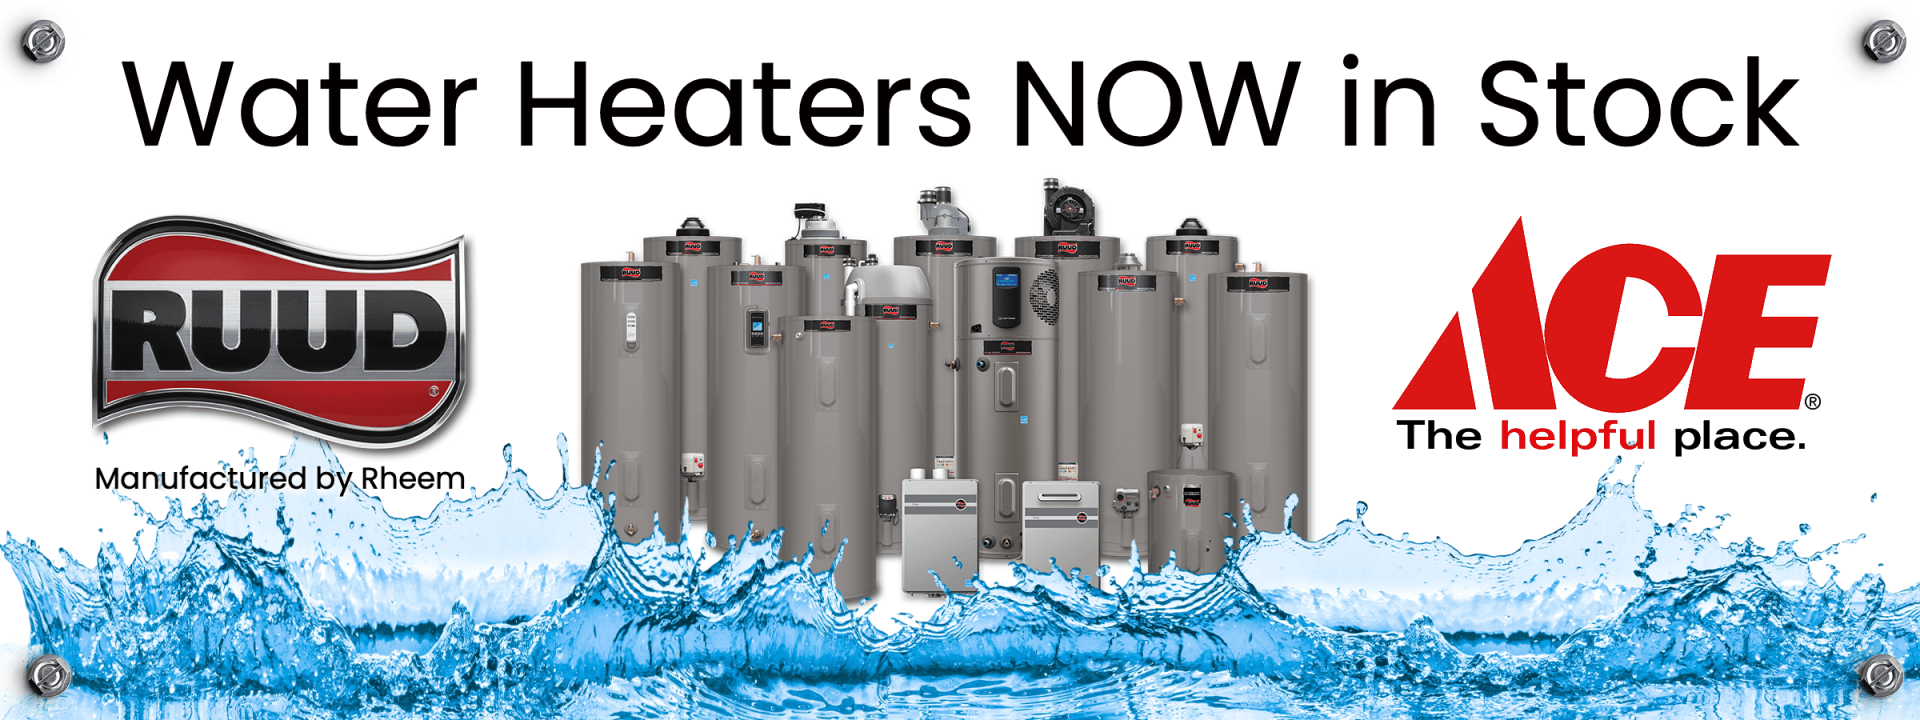 Ruud Water Heaters in Stock at Laskowski Ace Banner